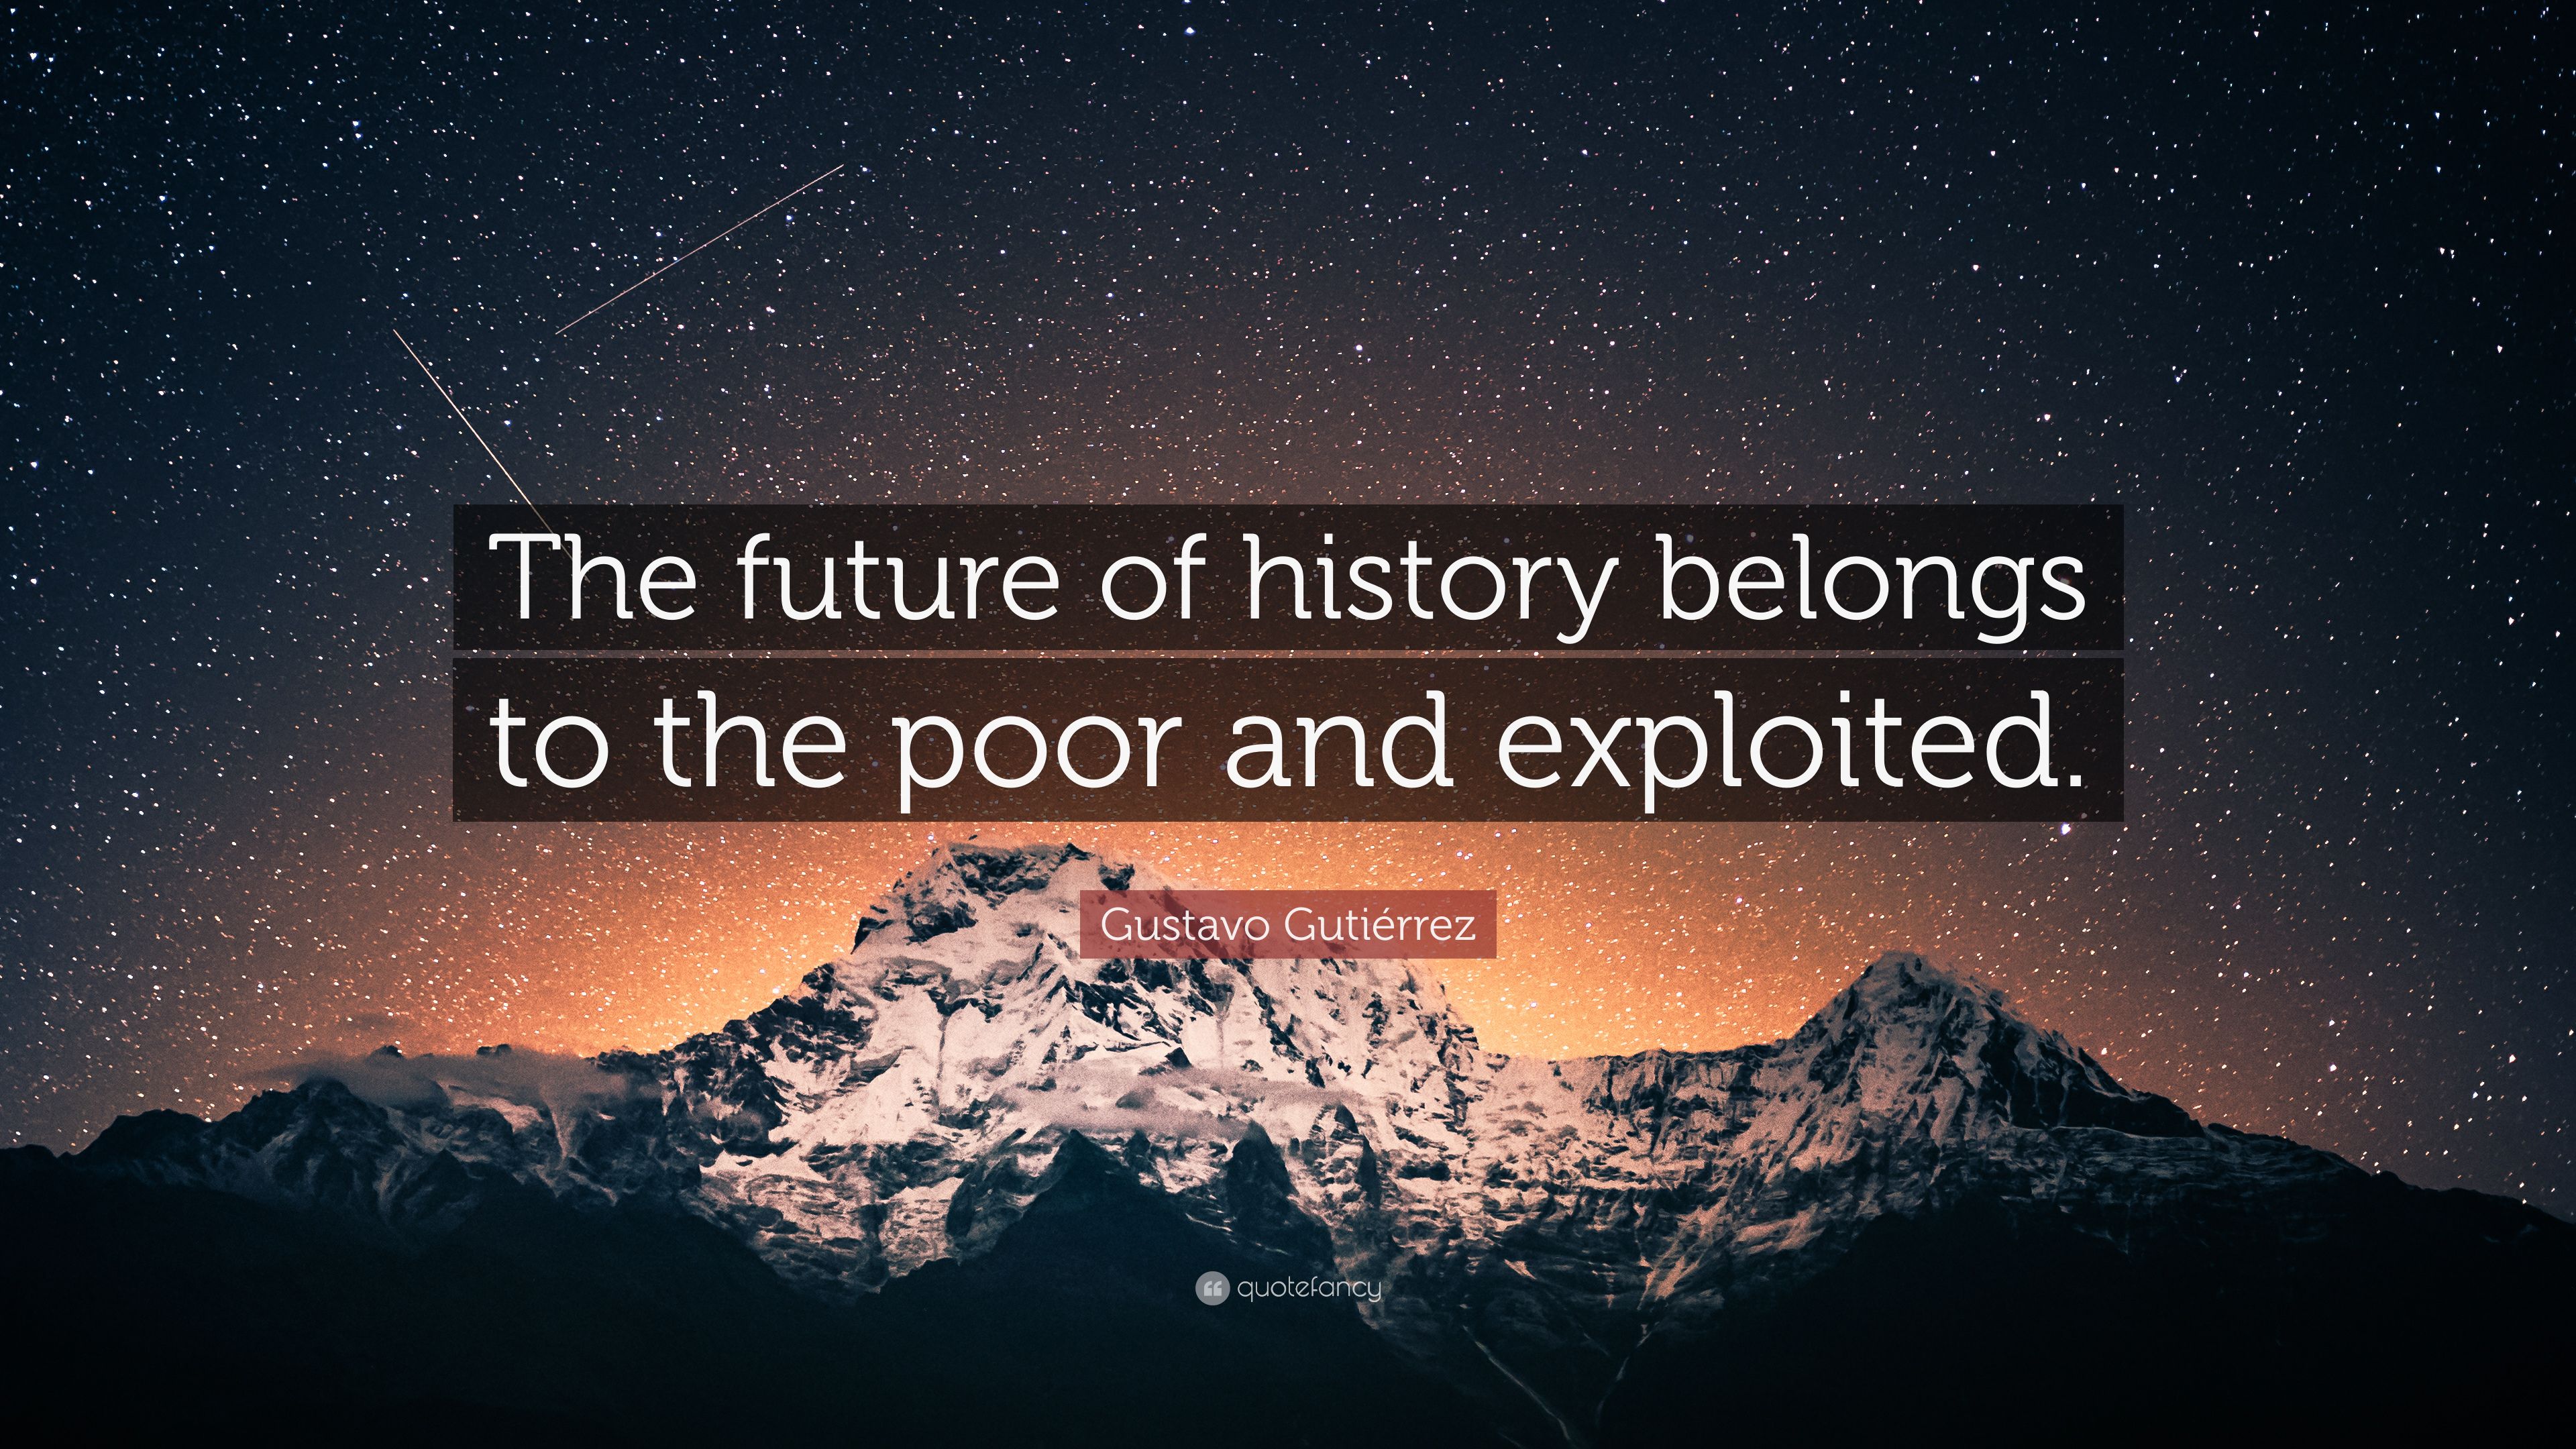 Gustavo Gutiérrez Quote: “The future of history belongs to the poor